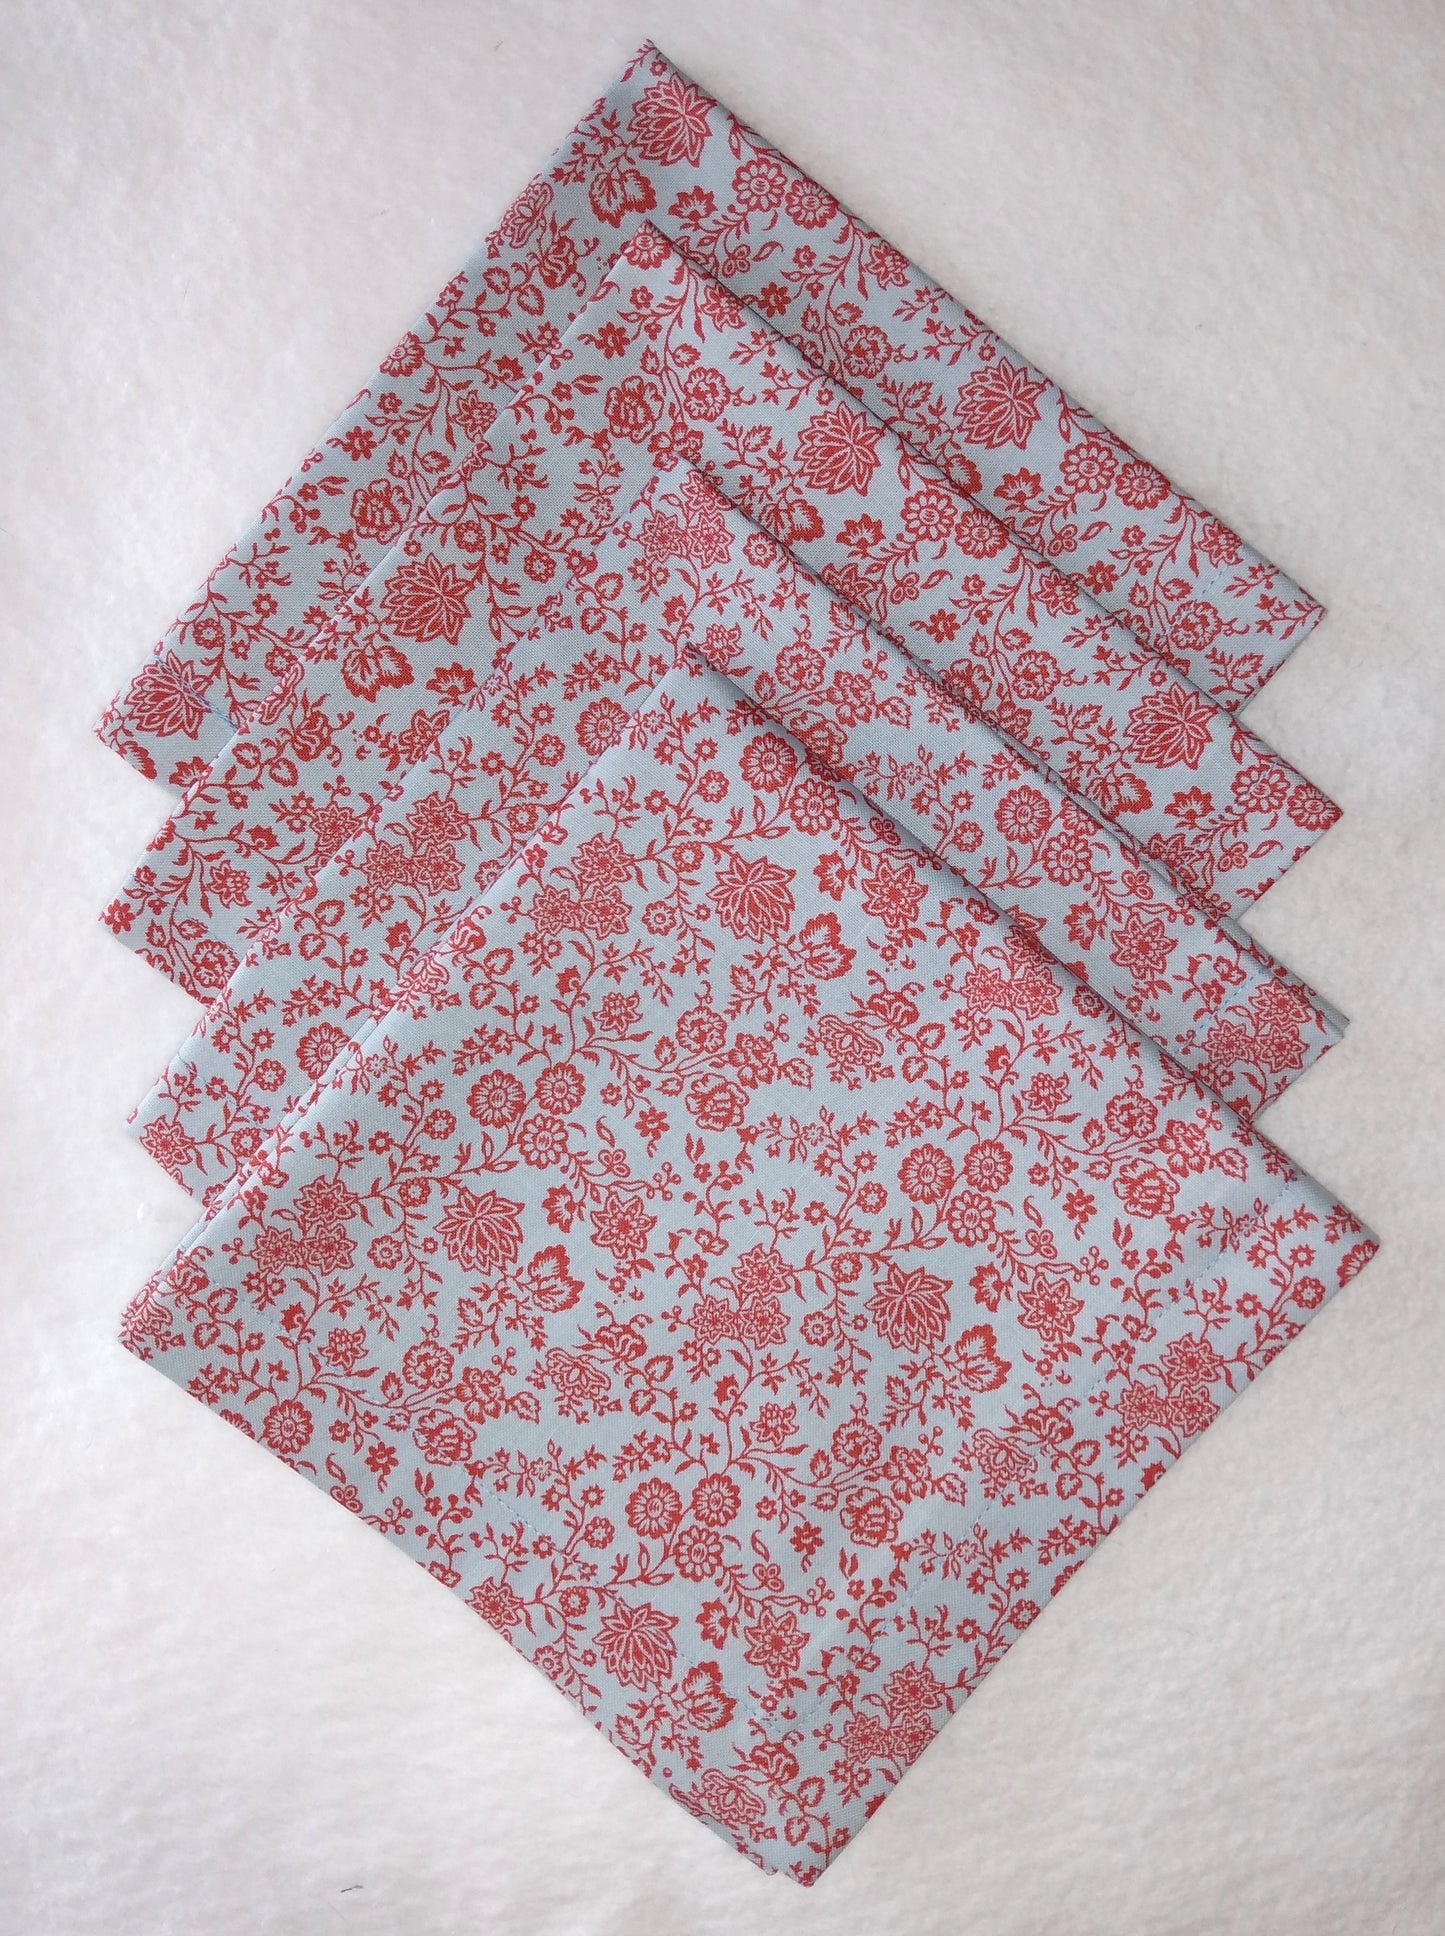 Napkins 100% Liberty Print Cotton Red Floral Light Blue 4 Lunch